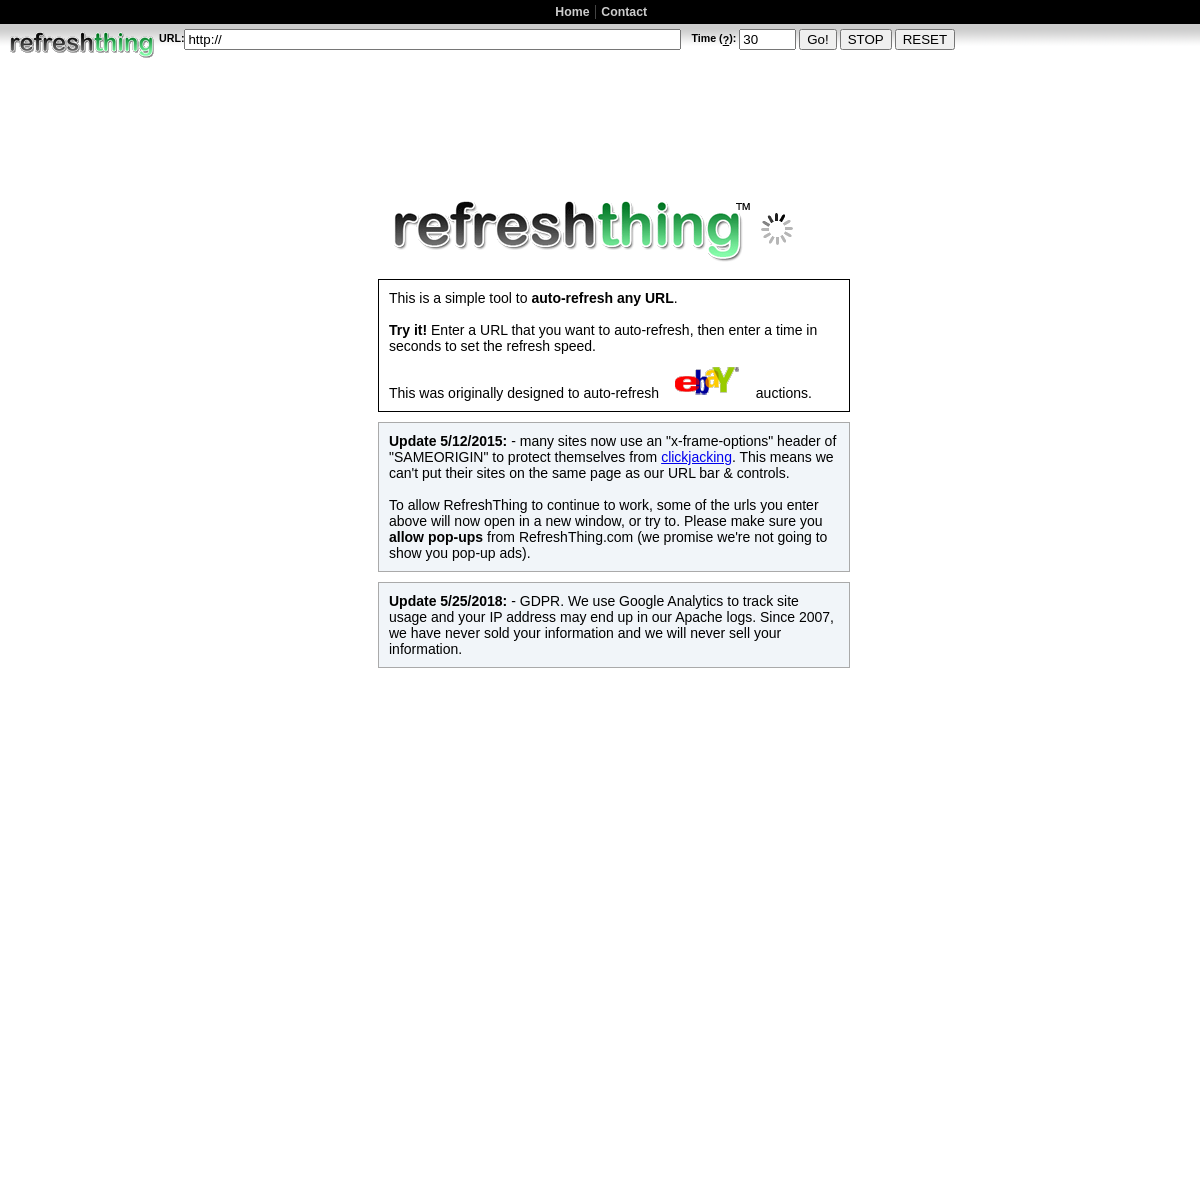 A complete backup of refreshthing.com